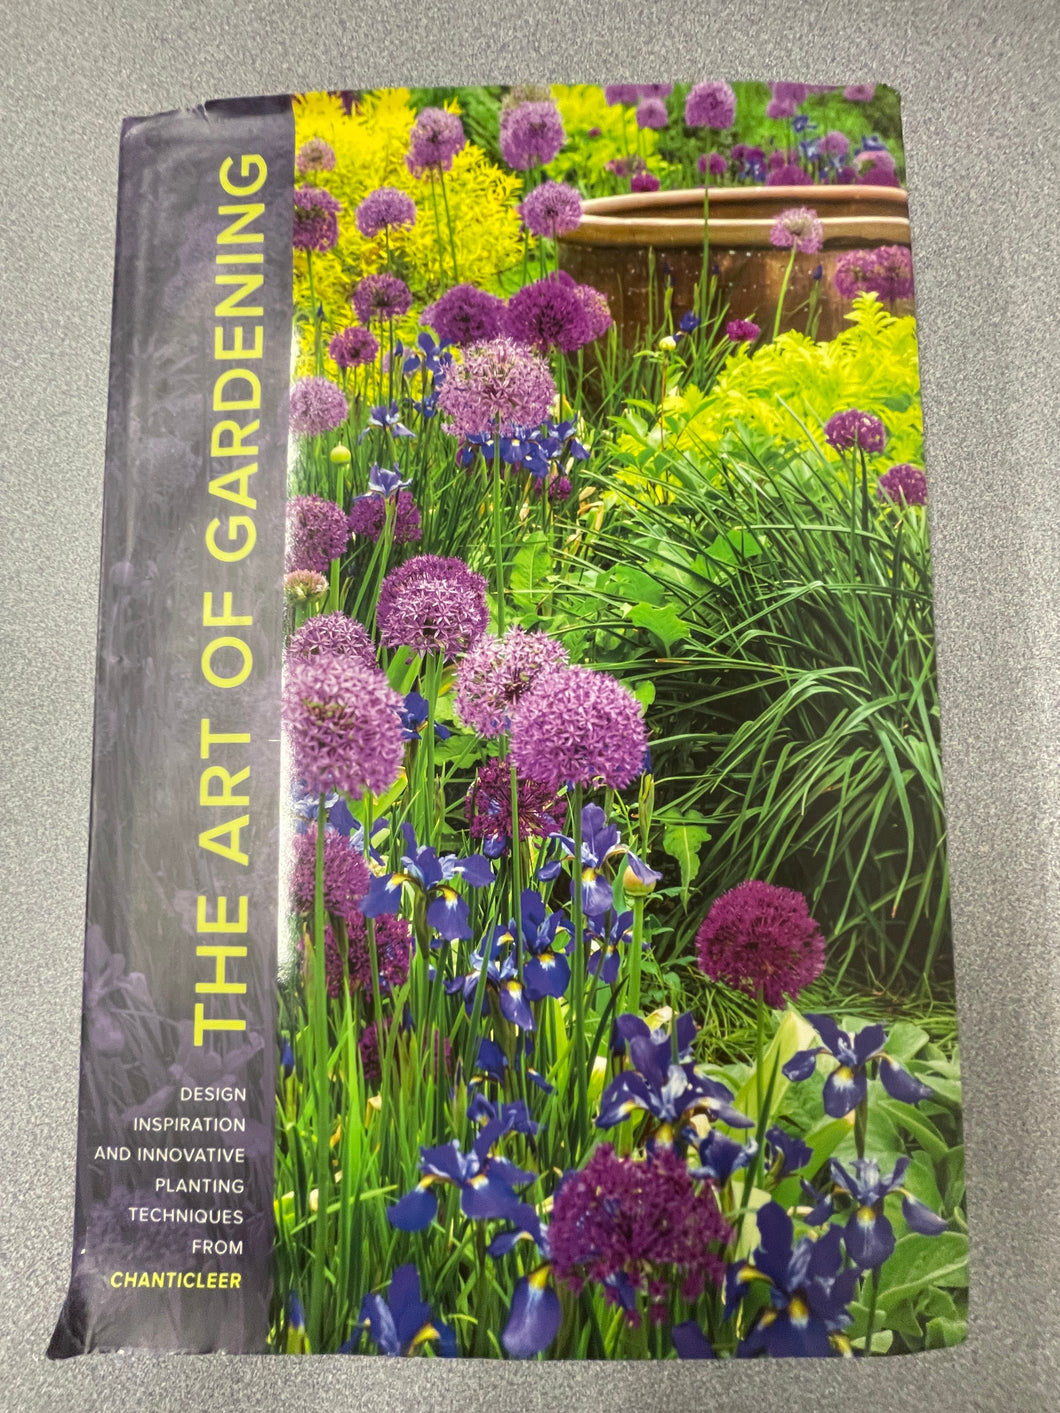 G  The Art of Gardening: Design Inspiration and Innovative Planting Techniques from Chanticleer, Thomas, R. William  [2015] N 2/24